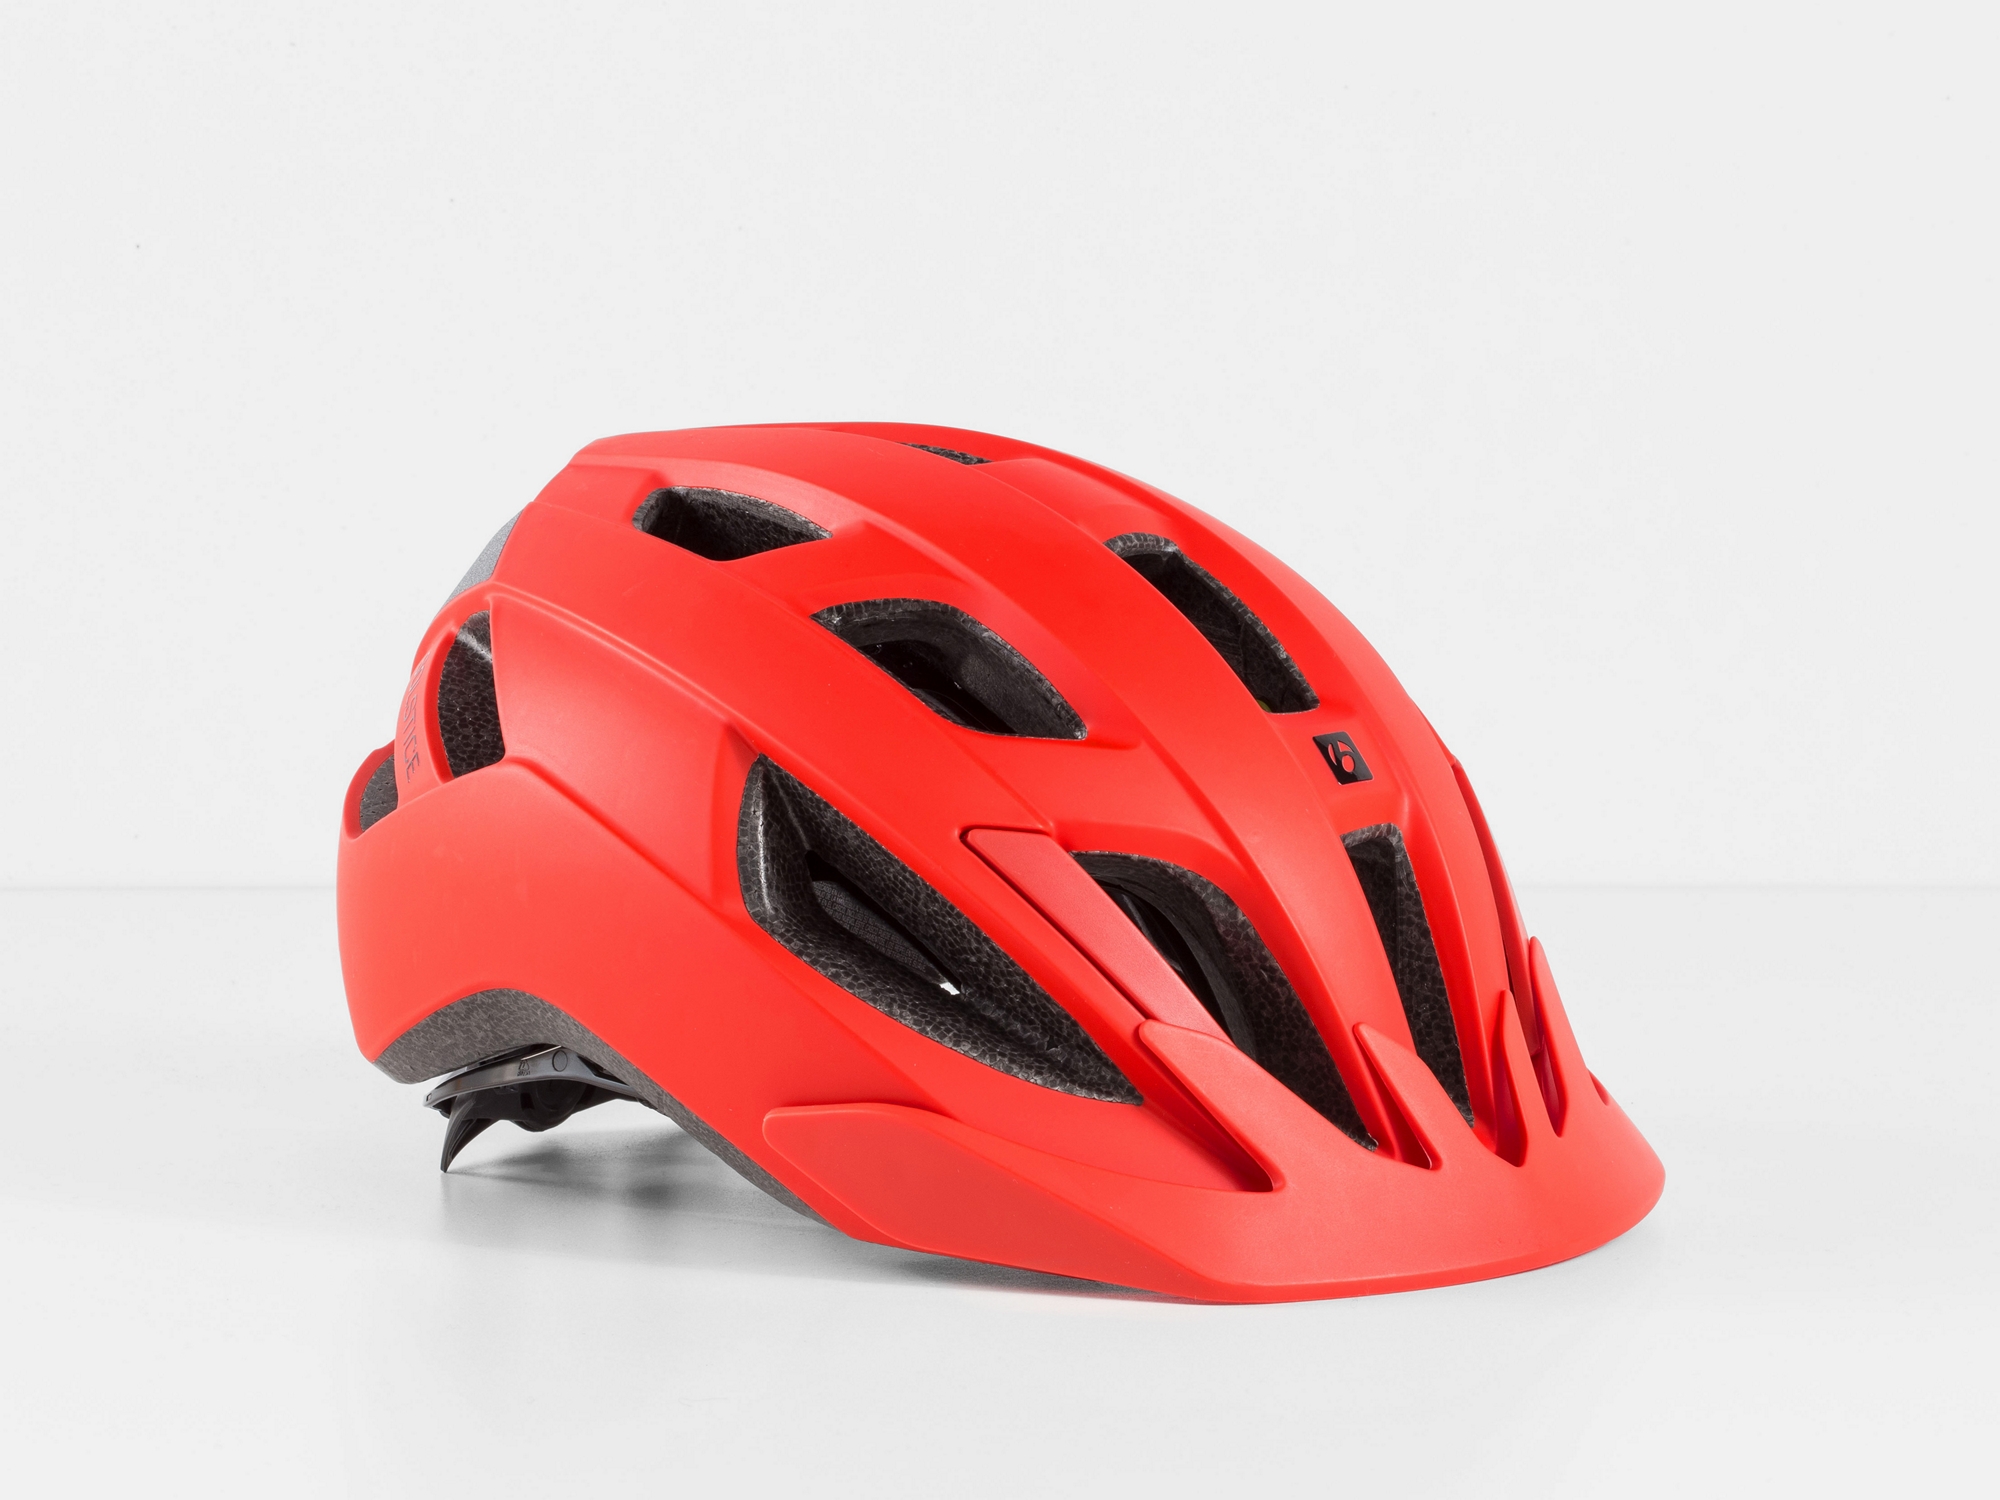 <a href="https://cycles-clement.be/product/bont-casque-solstice-mips-small-medium-red-ce/">BONT CASQUE SOLSTICE MIPS SMALL/MEDIUM RED CE</a>